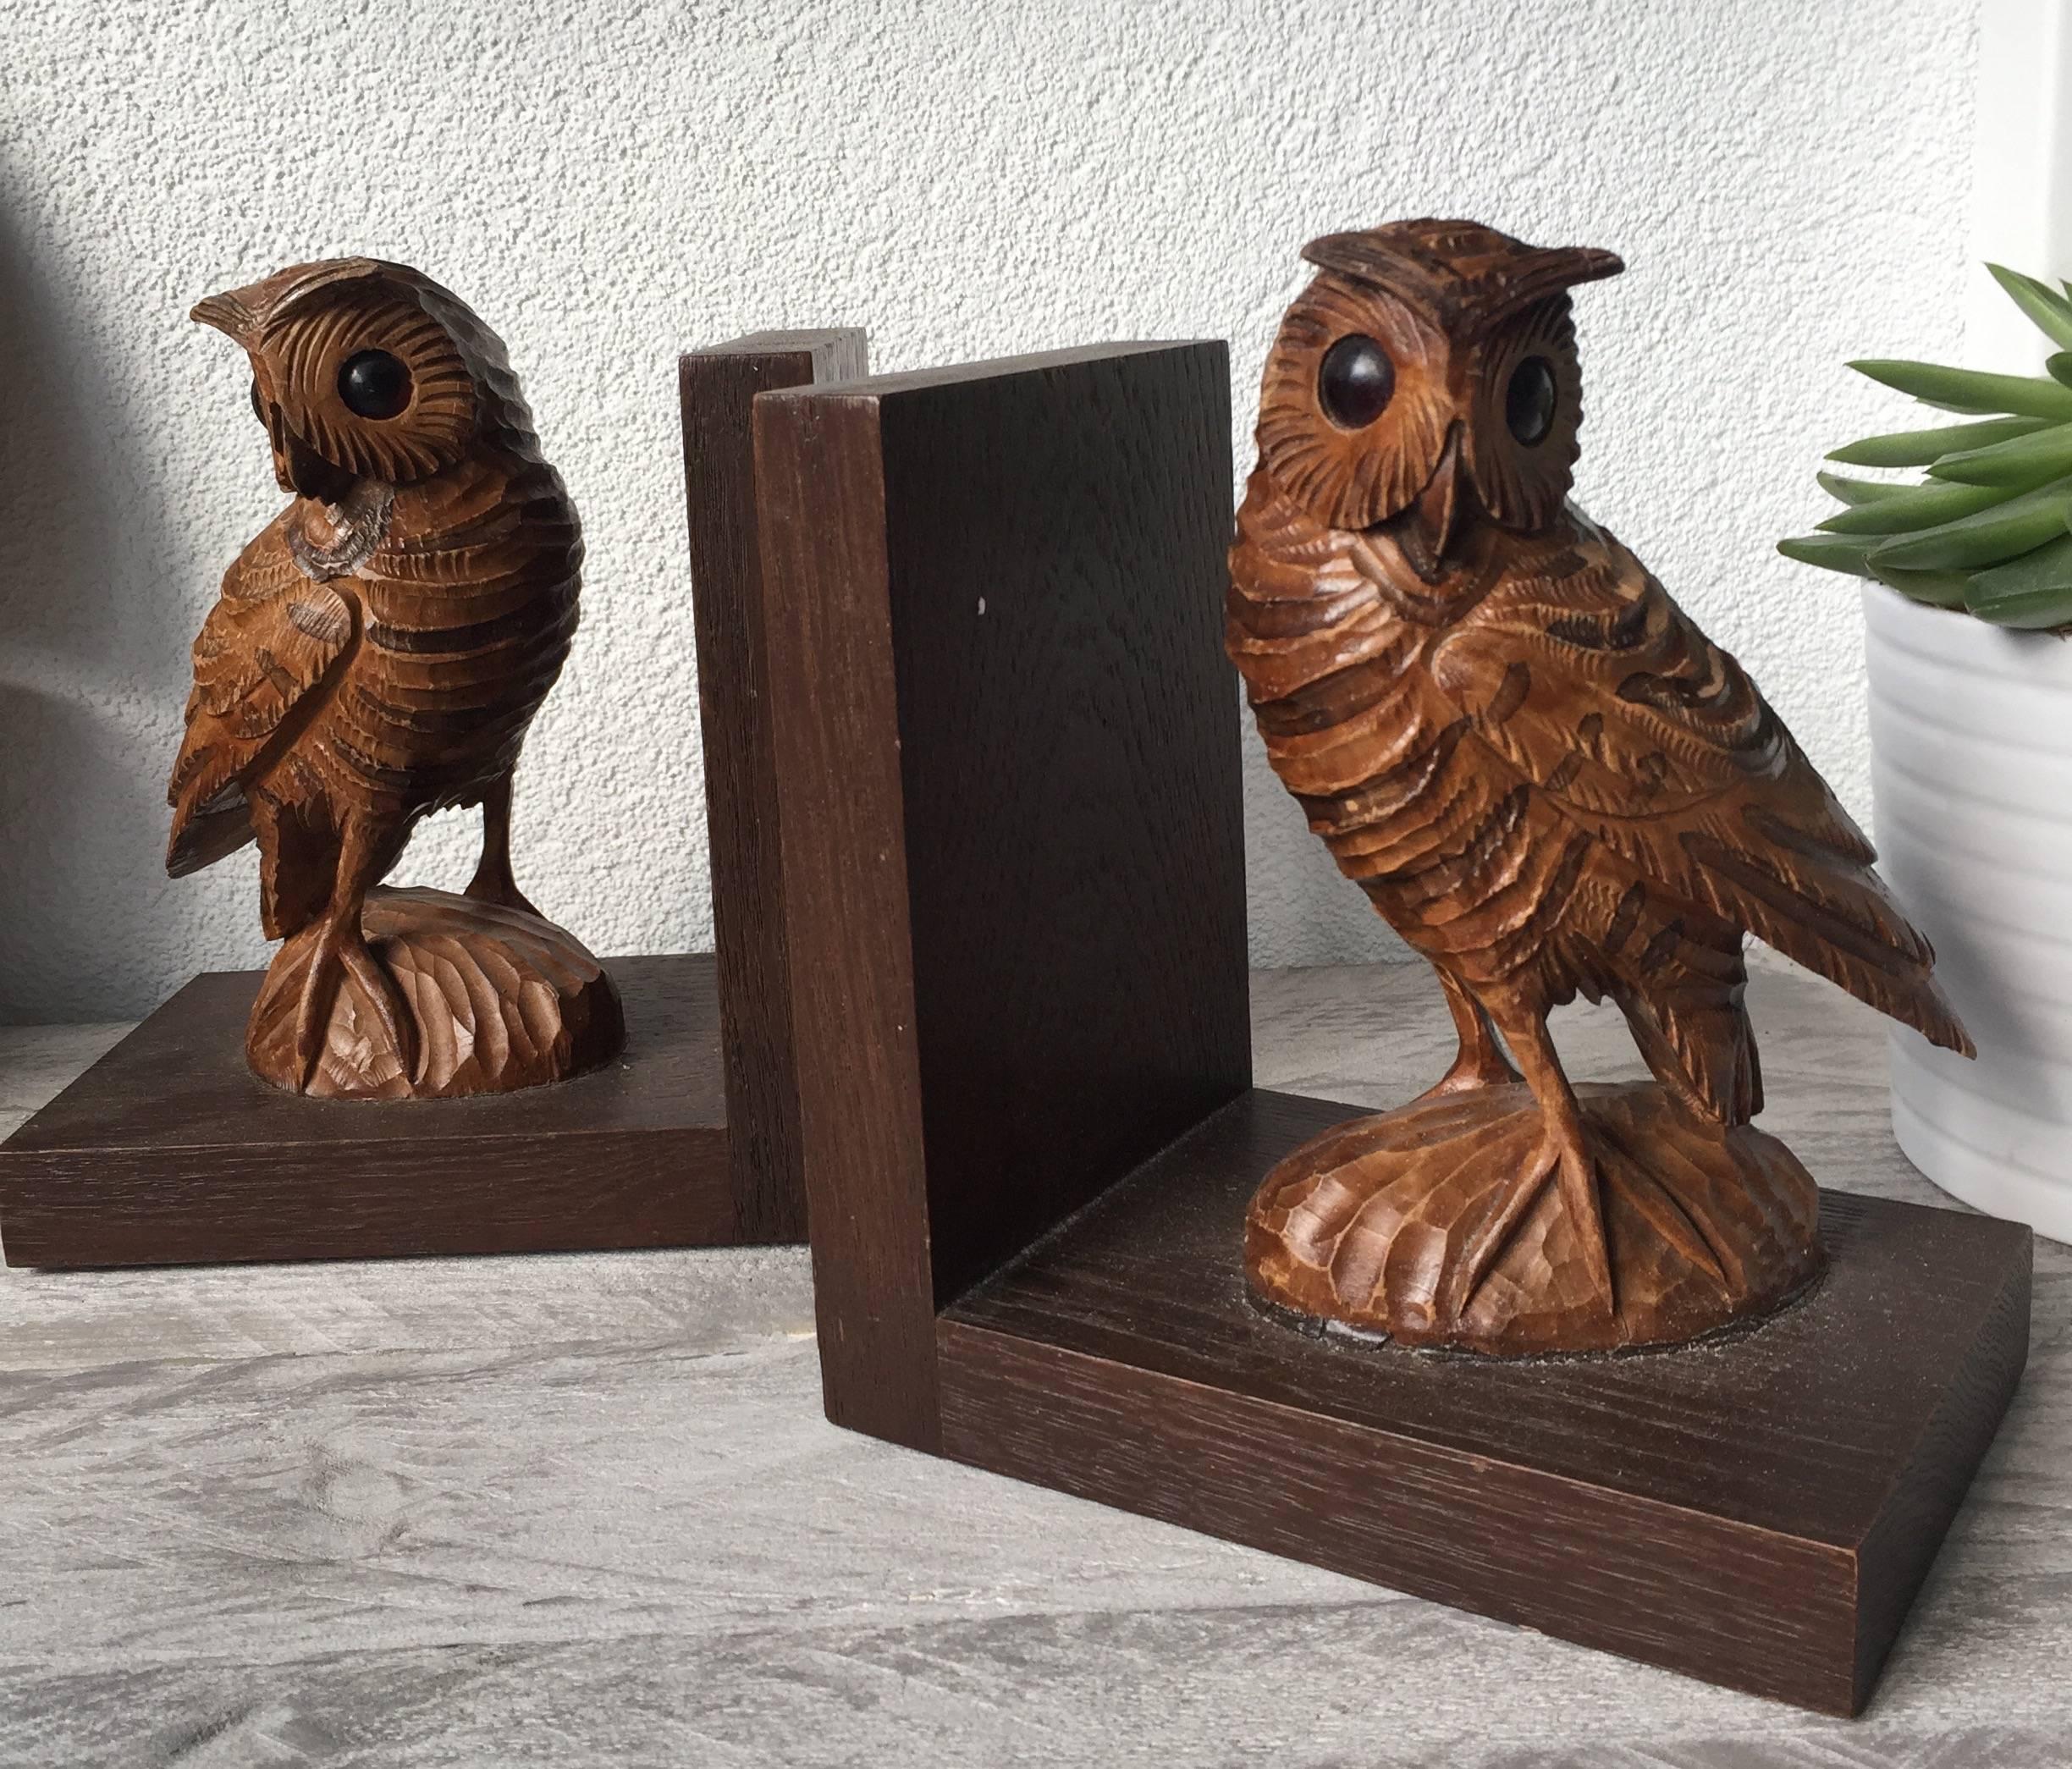 Hand-Carved Highly Decorative Pair of Mid-20th Century Quality Carved Owl Bookends